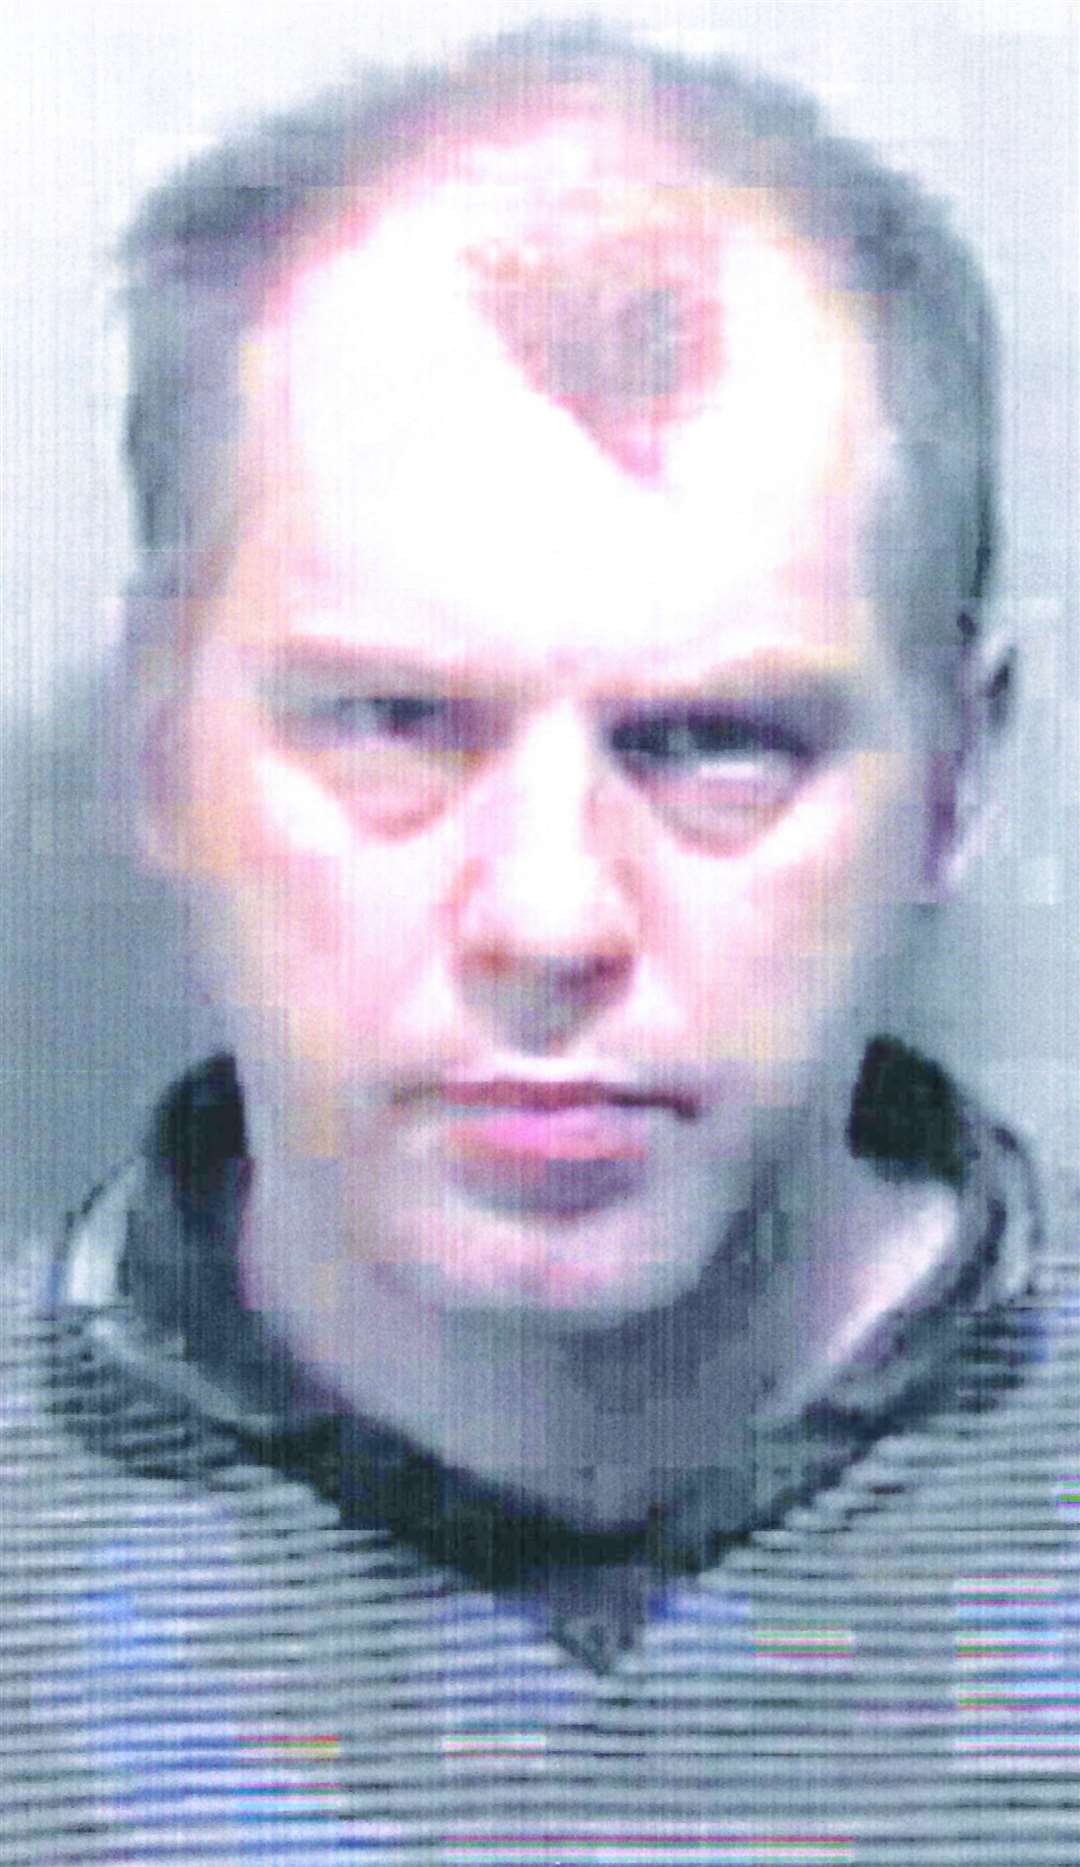 Michael Stone was found guilty at Maidstone Crown Court on Friday October 23, 1998 of the murders of Lin Russell and her six-year-old daughter, Megan, and the attempted murder of Megan's sister Josie